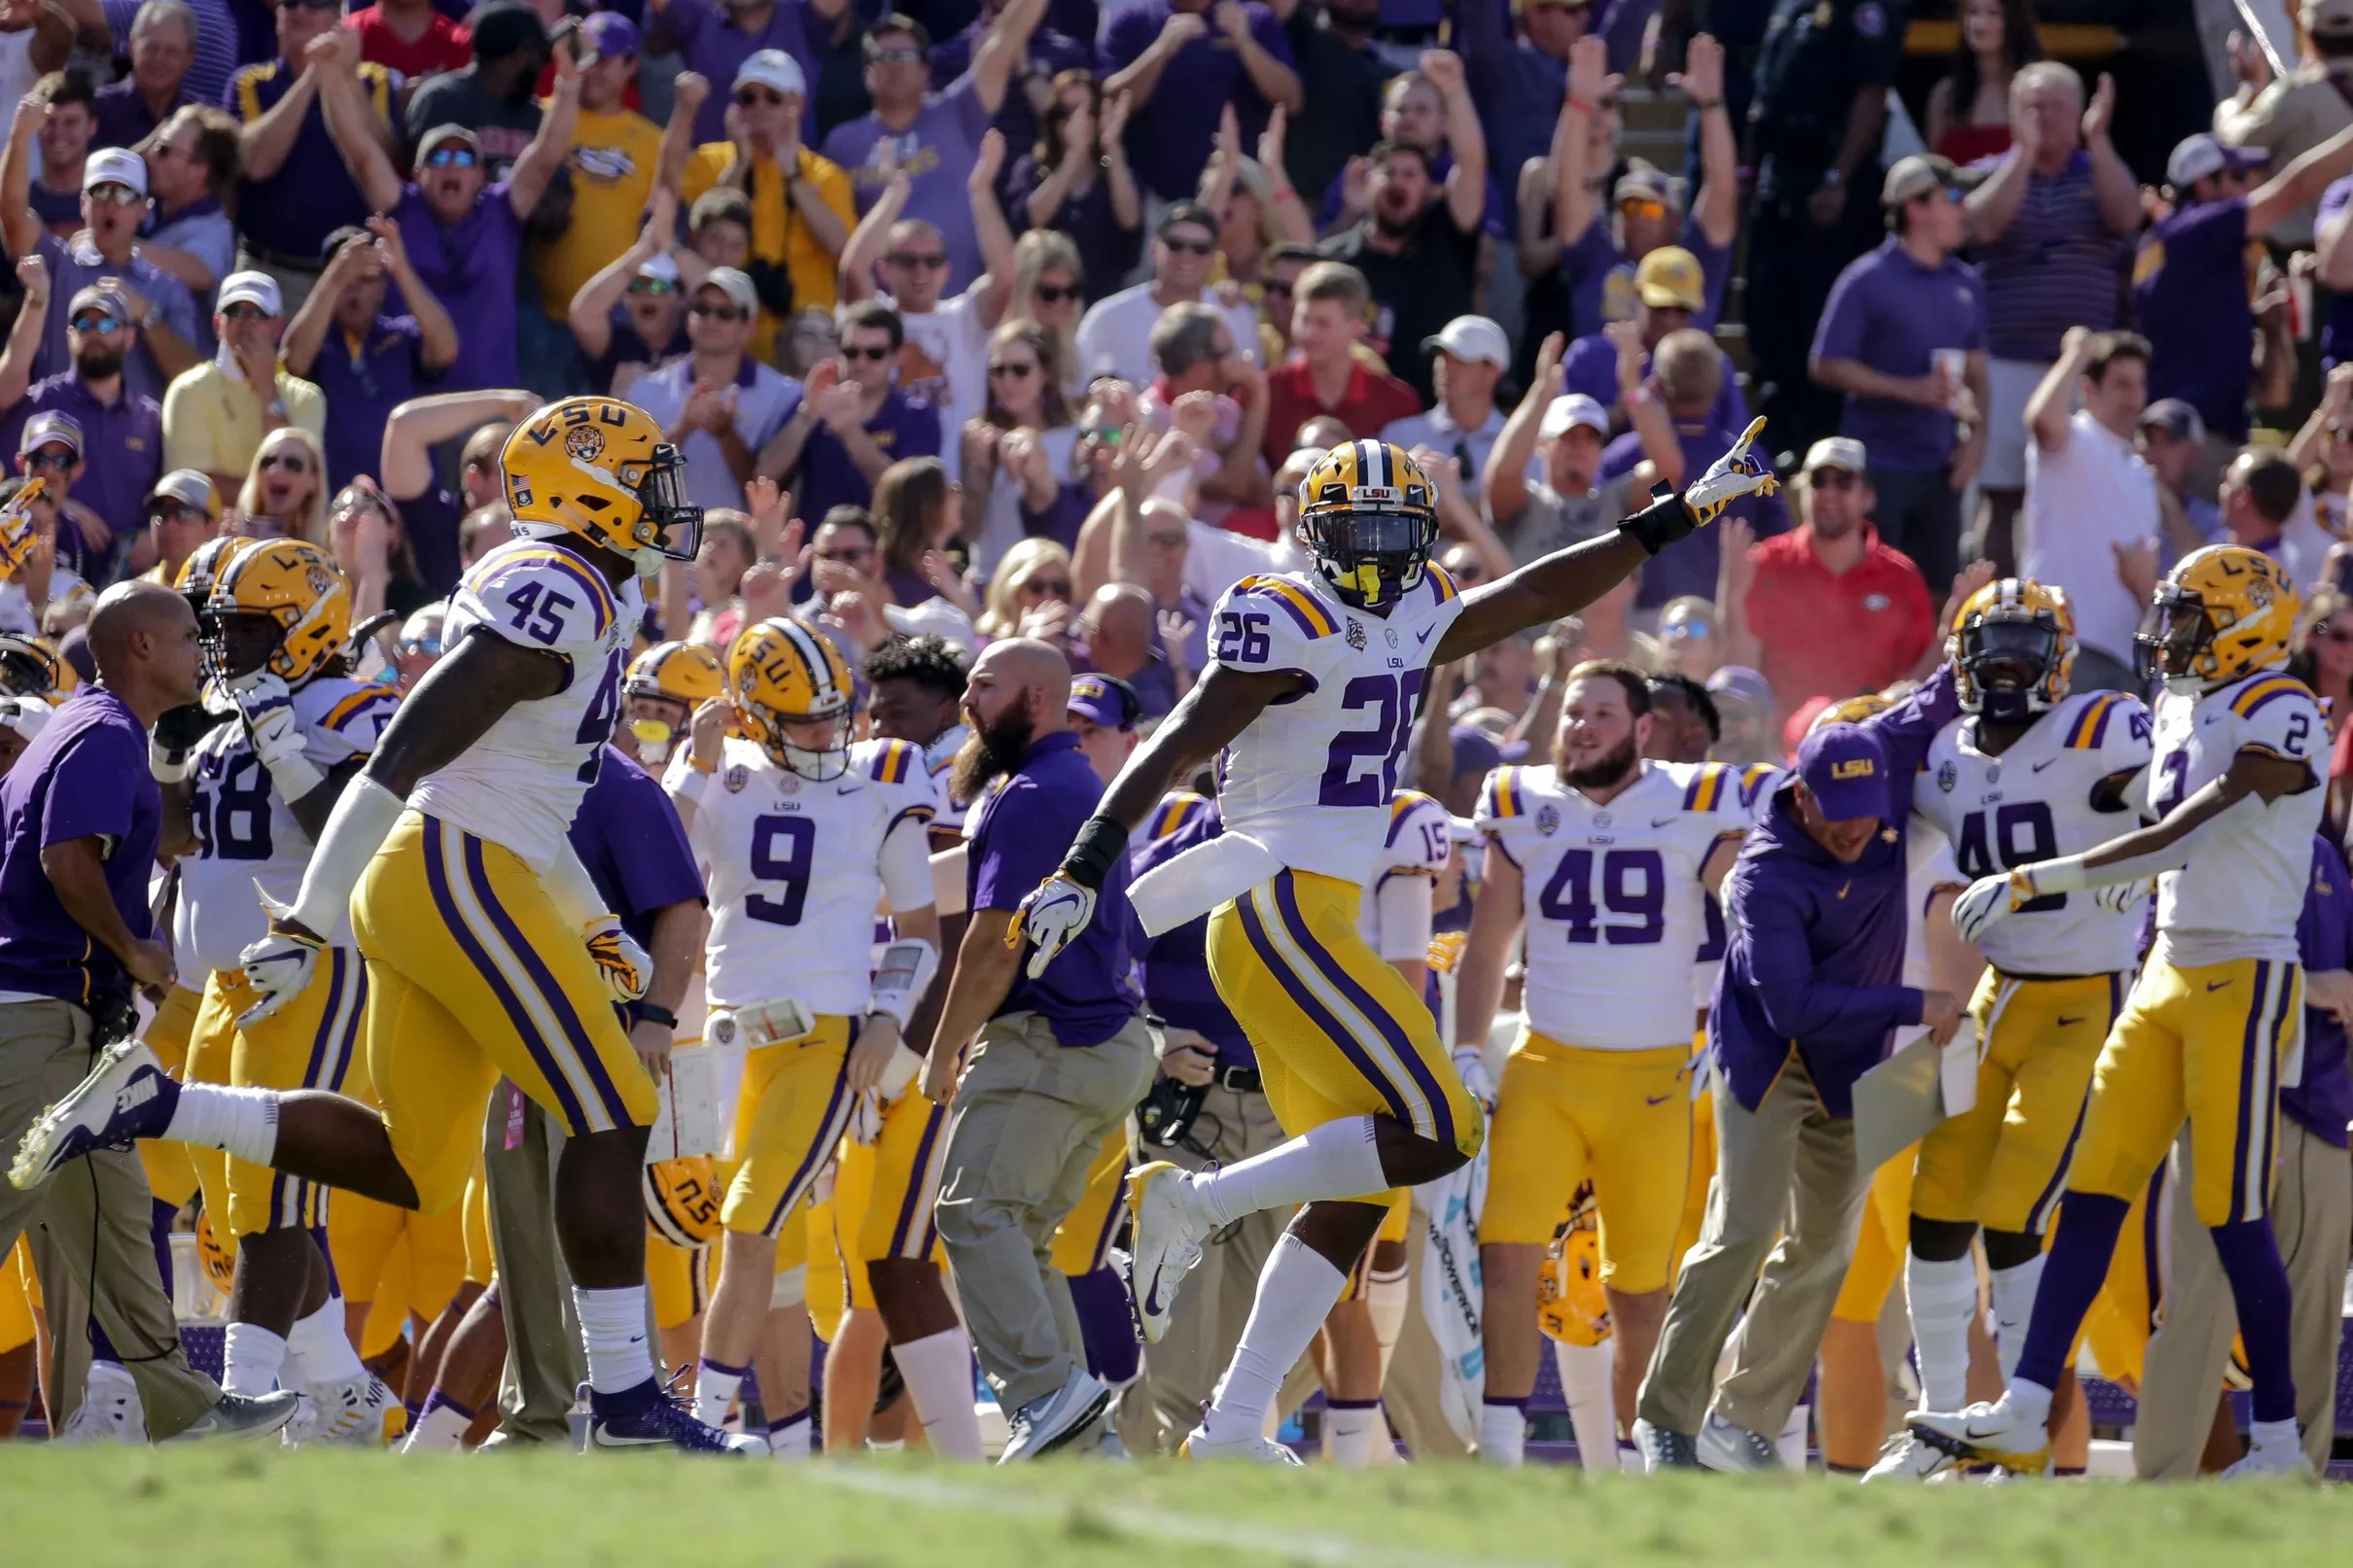 LSU vs. Alabama What to Watch For